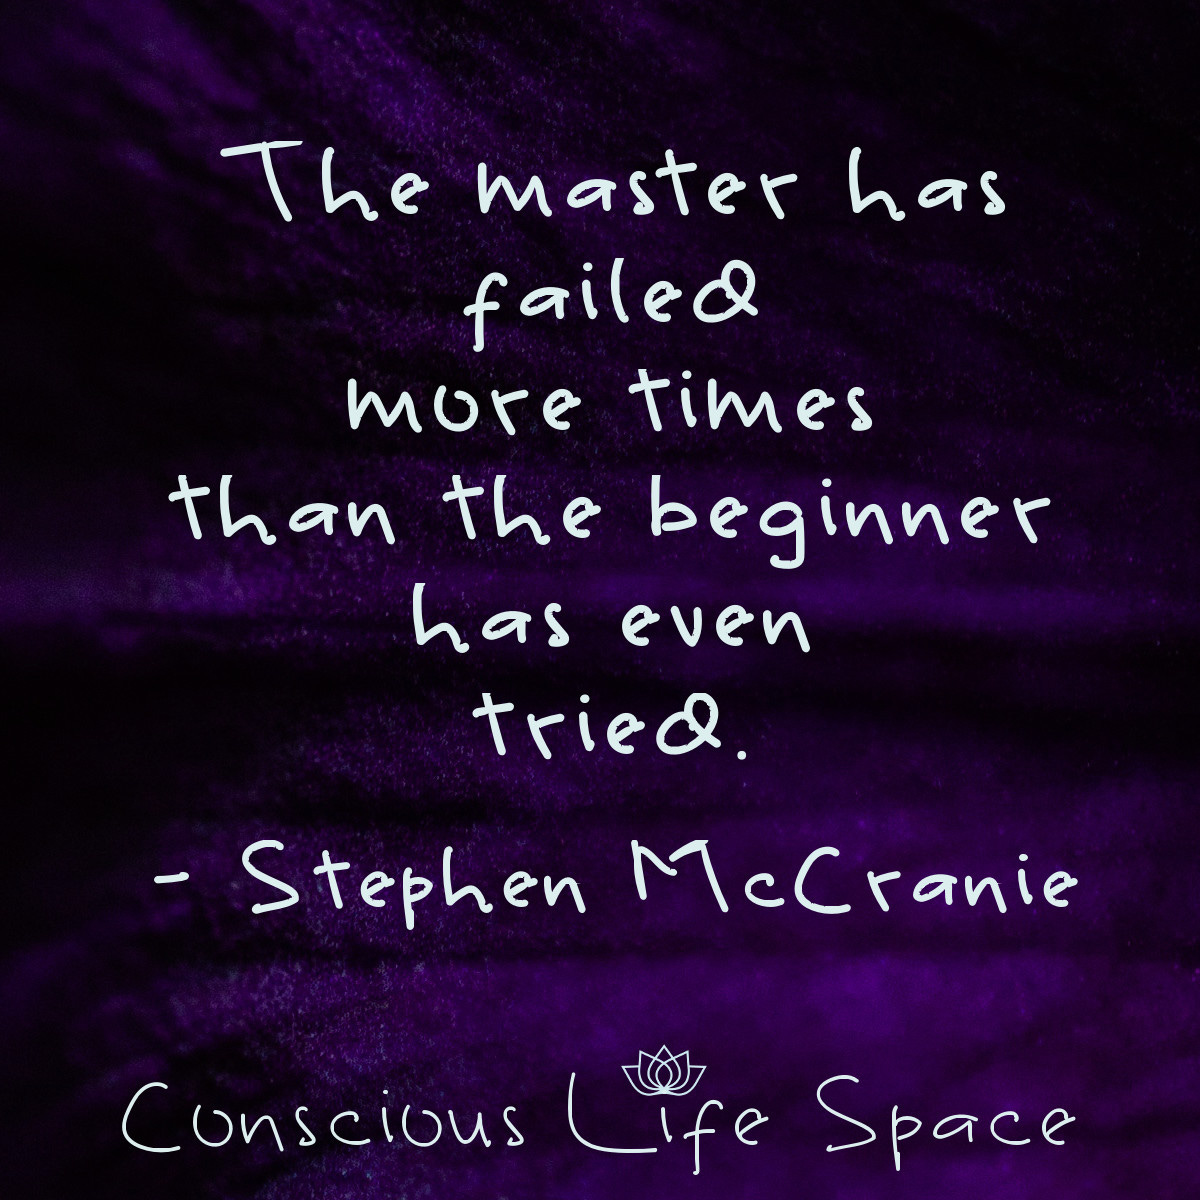 The master has failed more time than the beginner has even tried. - Stephen McCranie